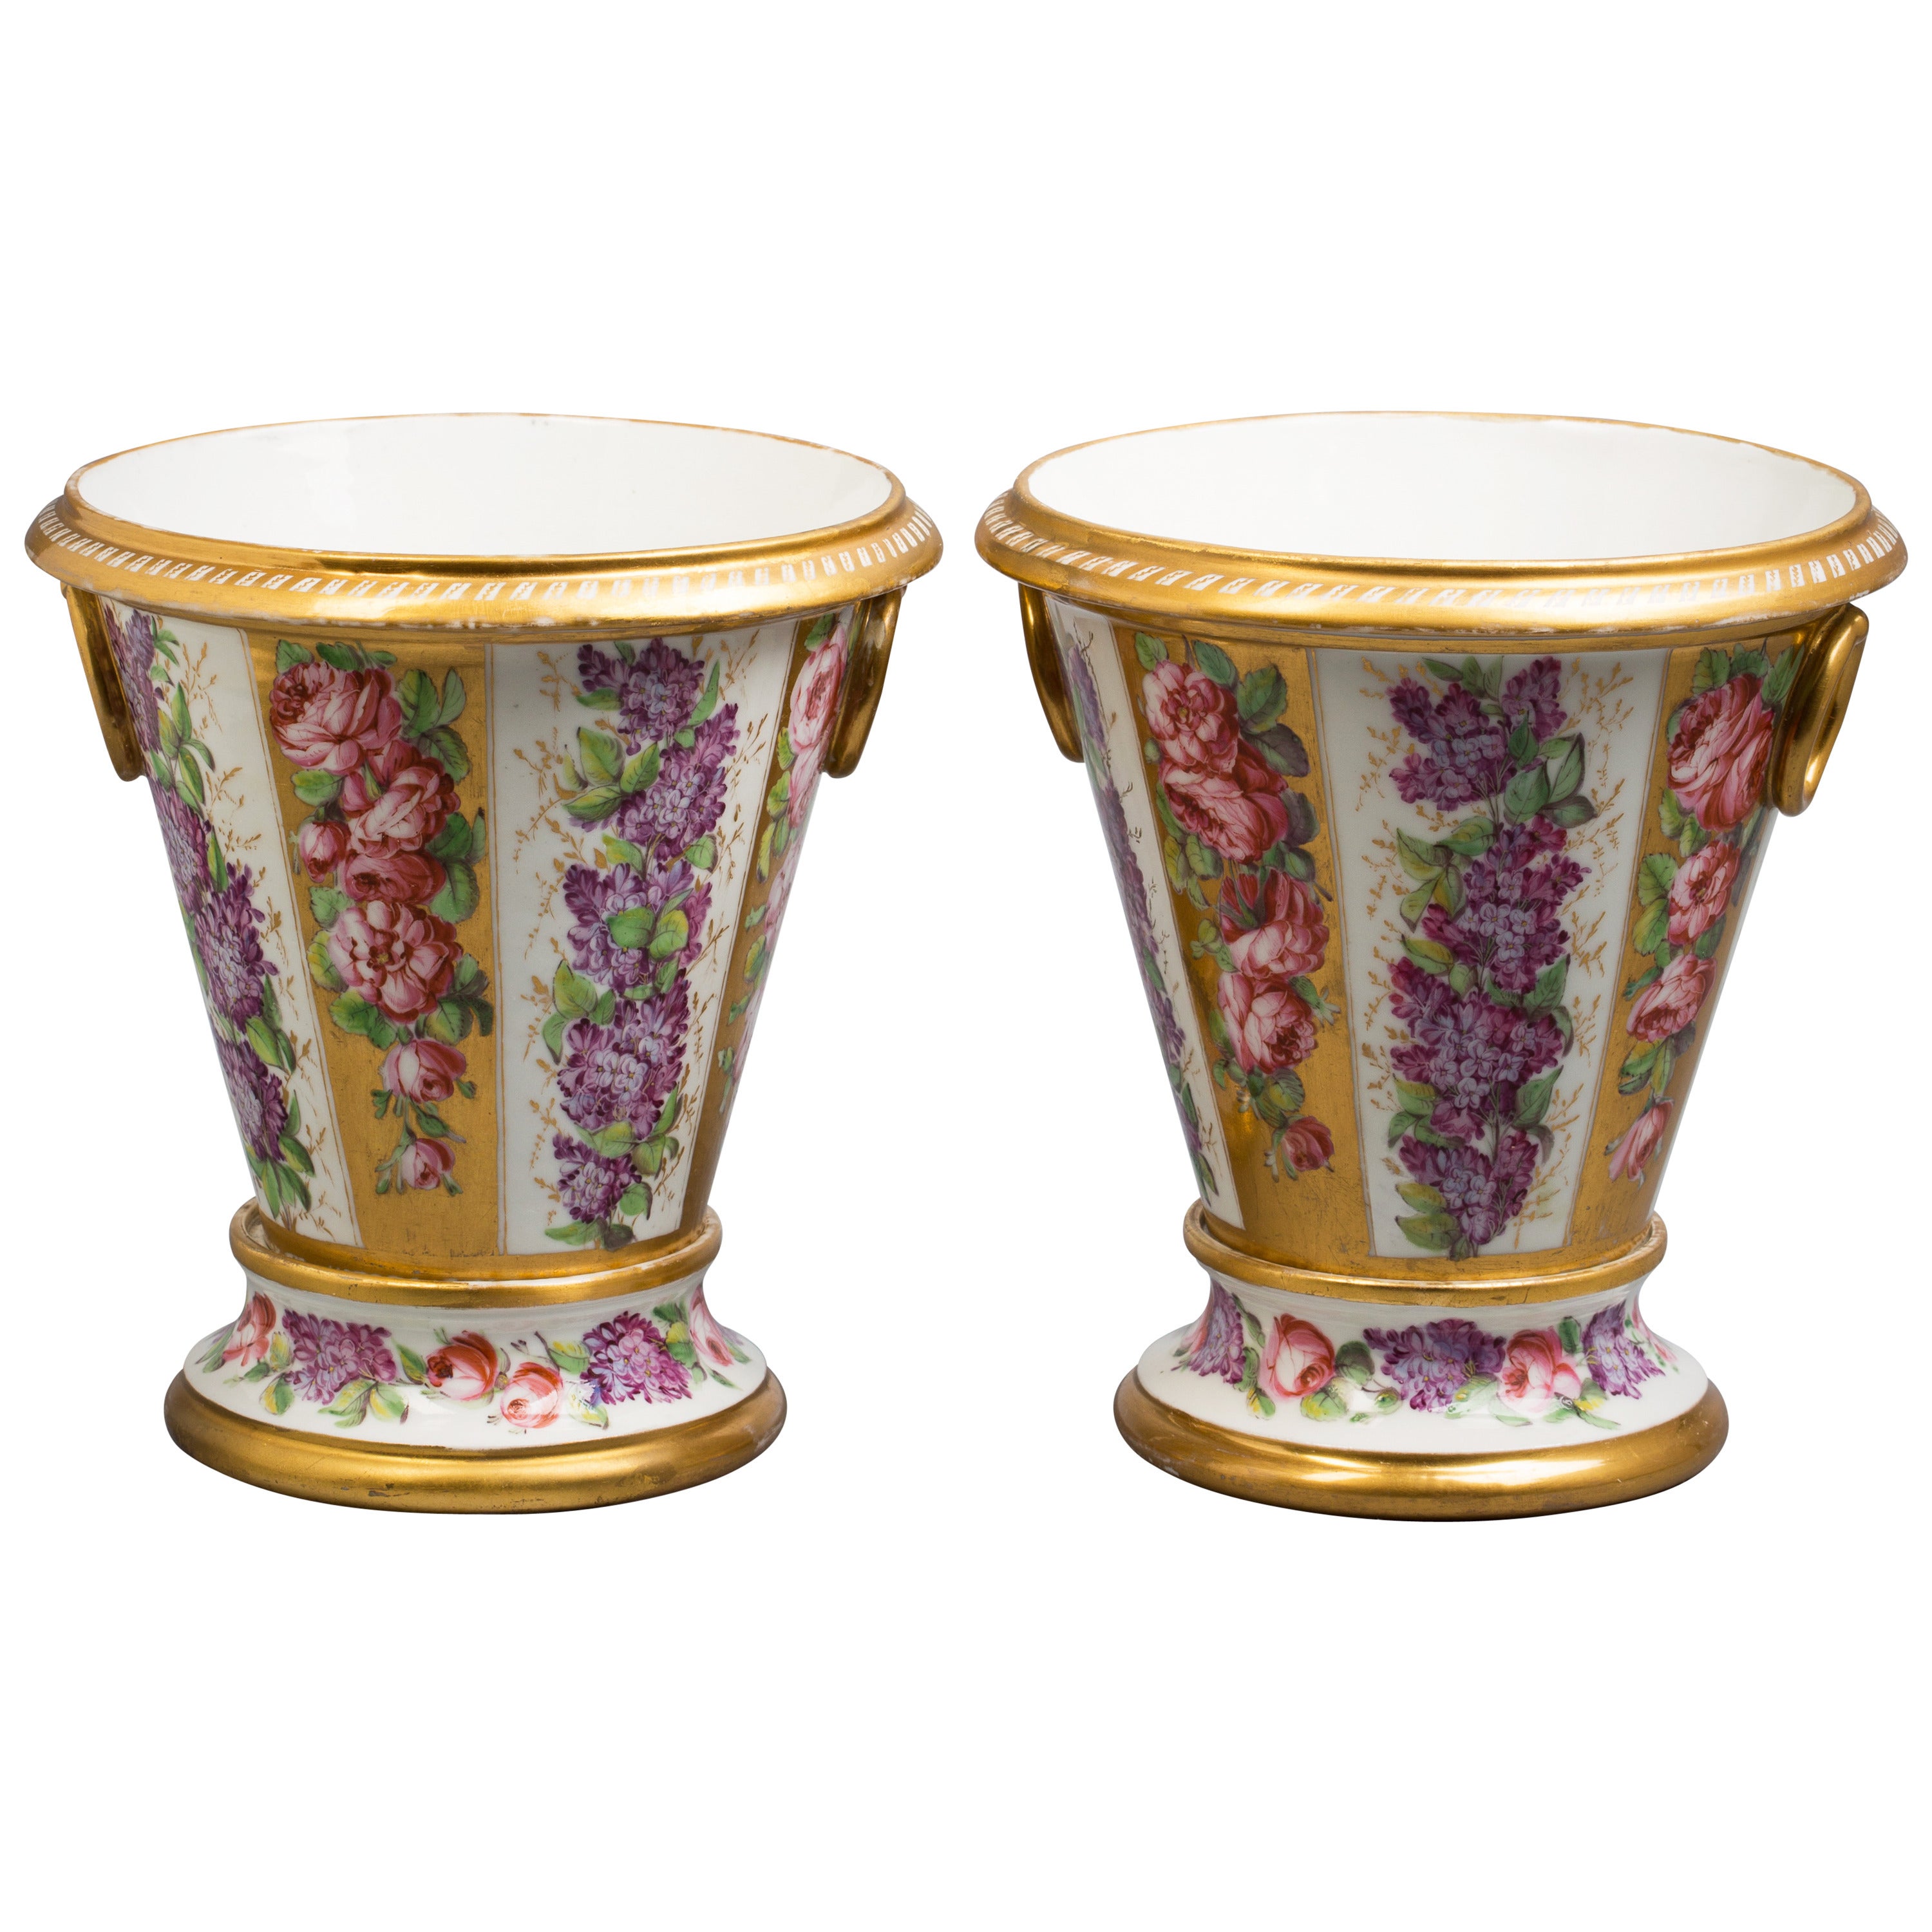 Pair of Paris Porcelain Cachepots and Stands, circa 1820 For Sale